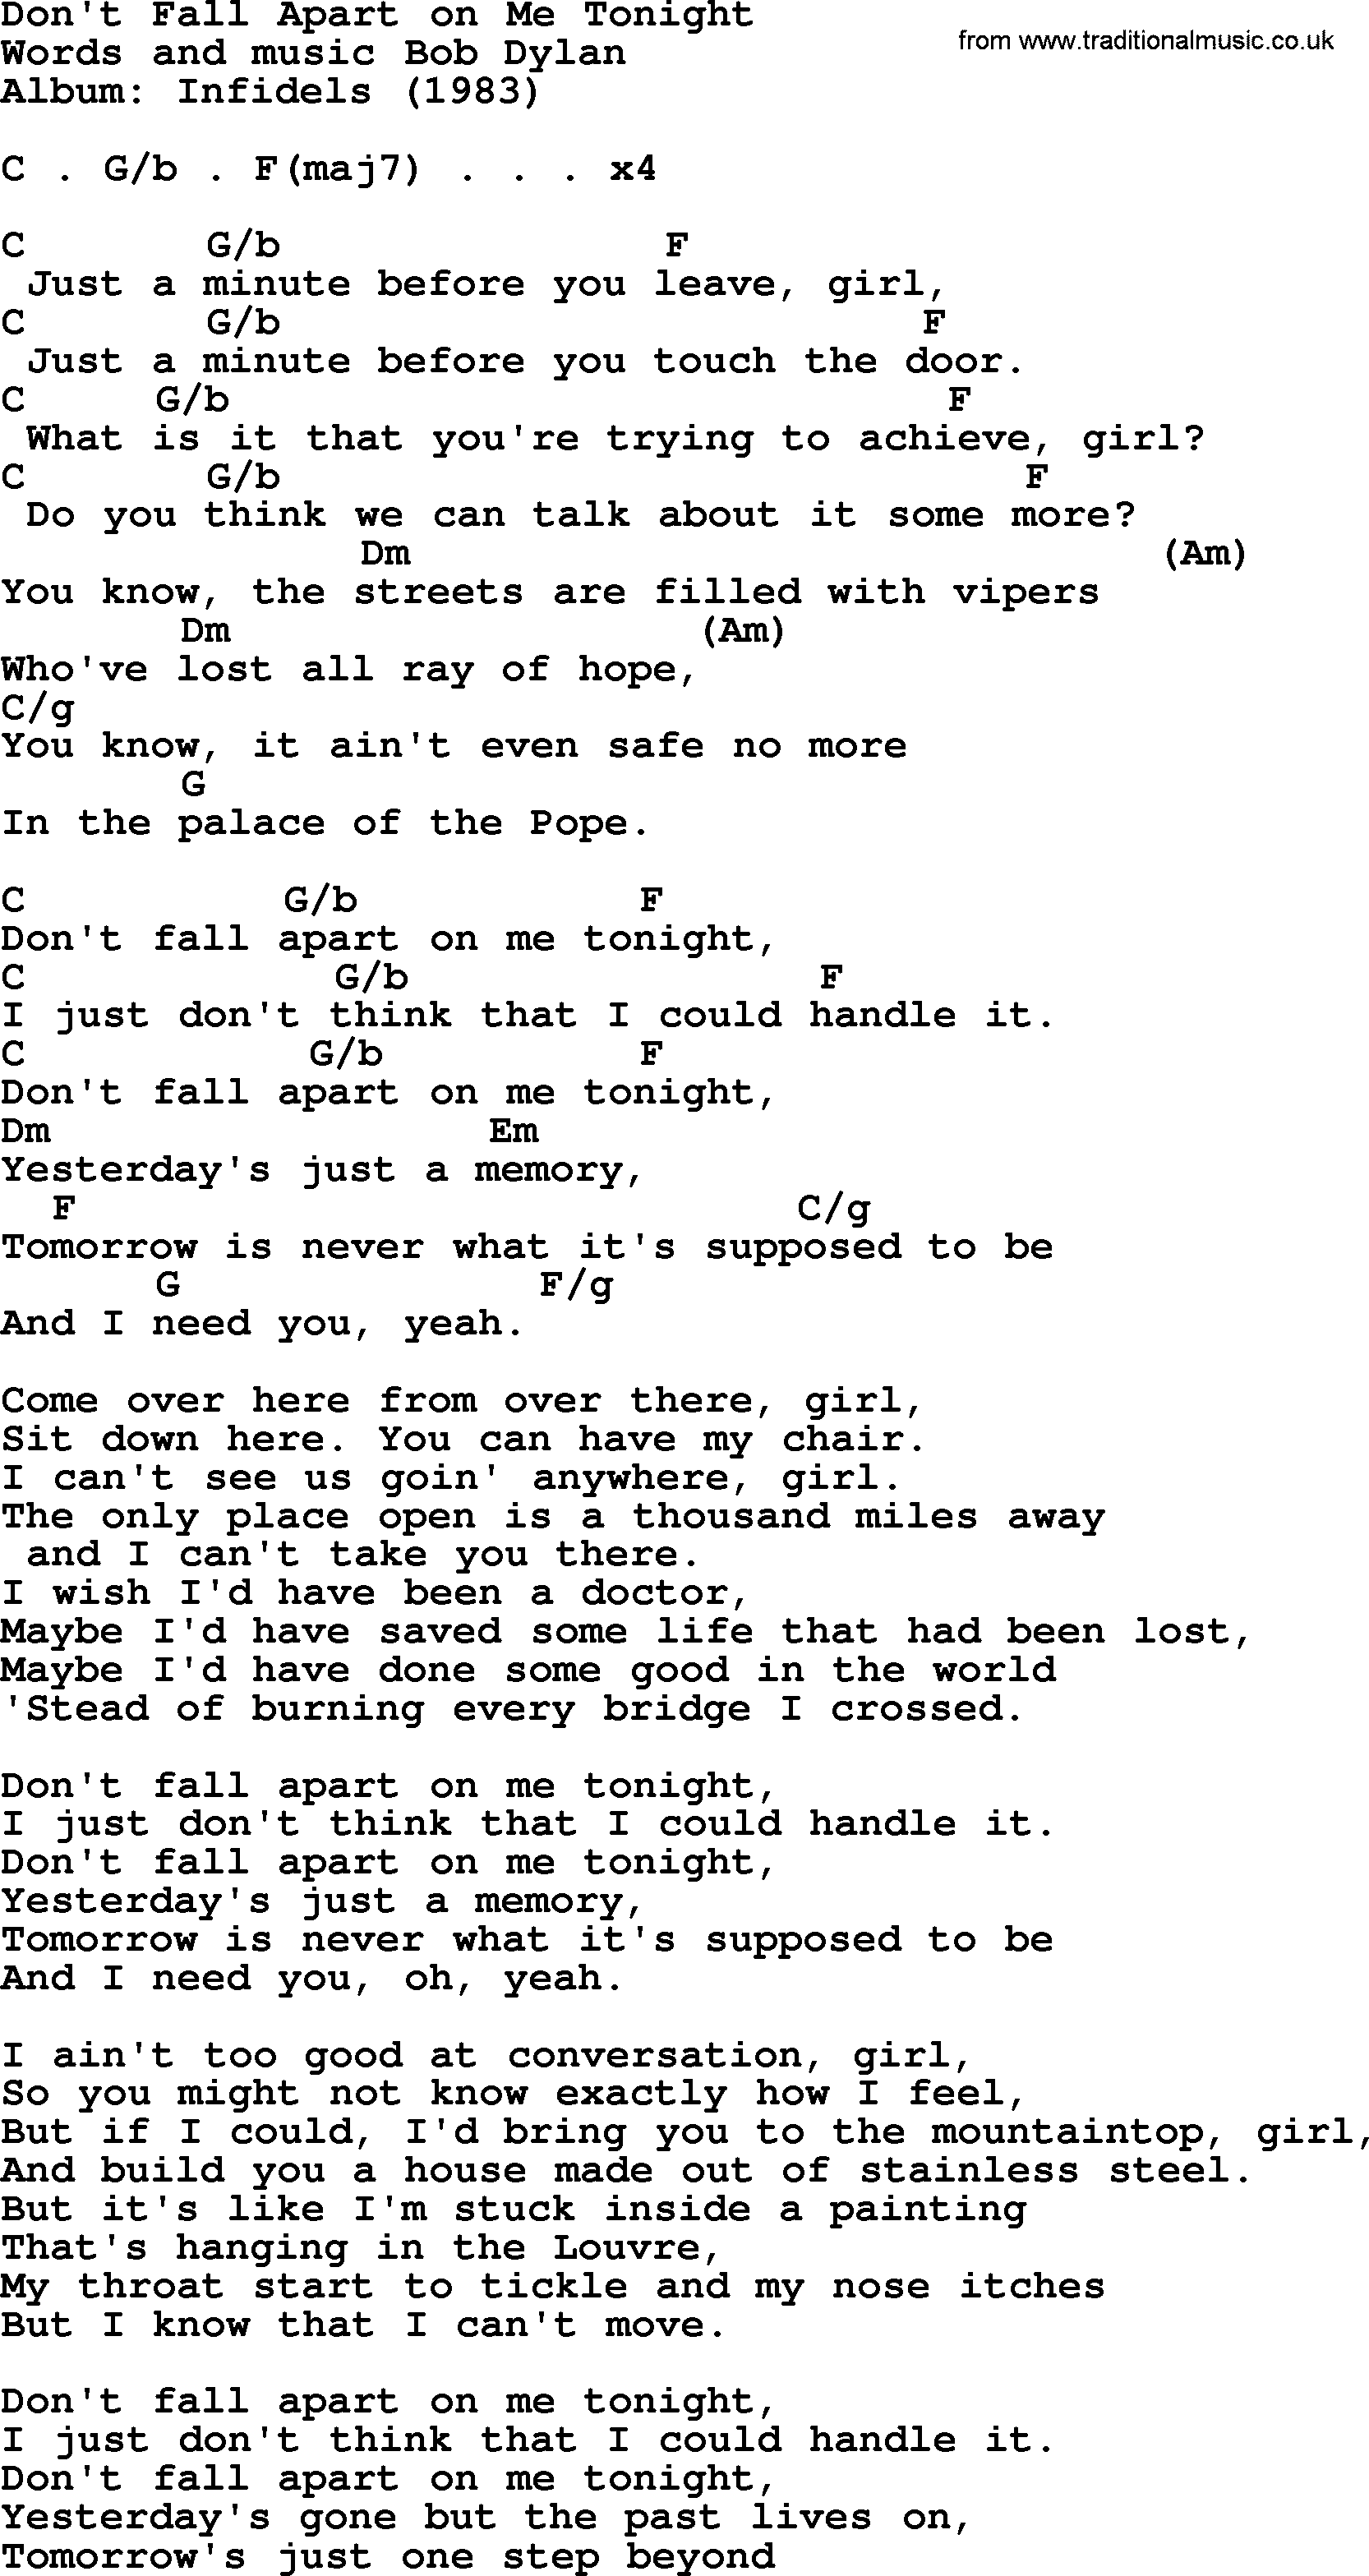 Bob Dylan song, lyrics with chords - Don't Fall Apart on Me Tonight